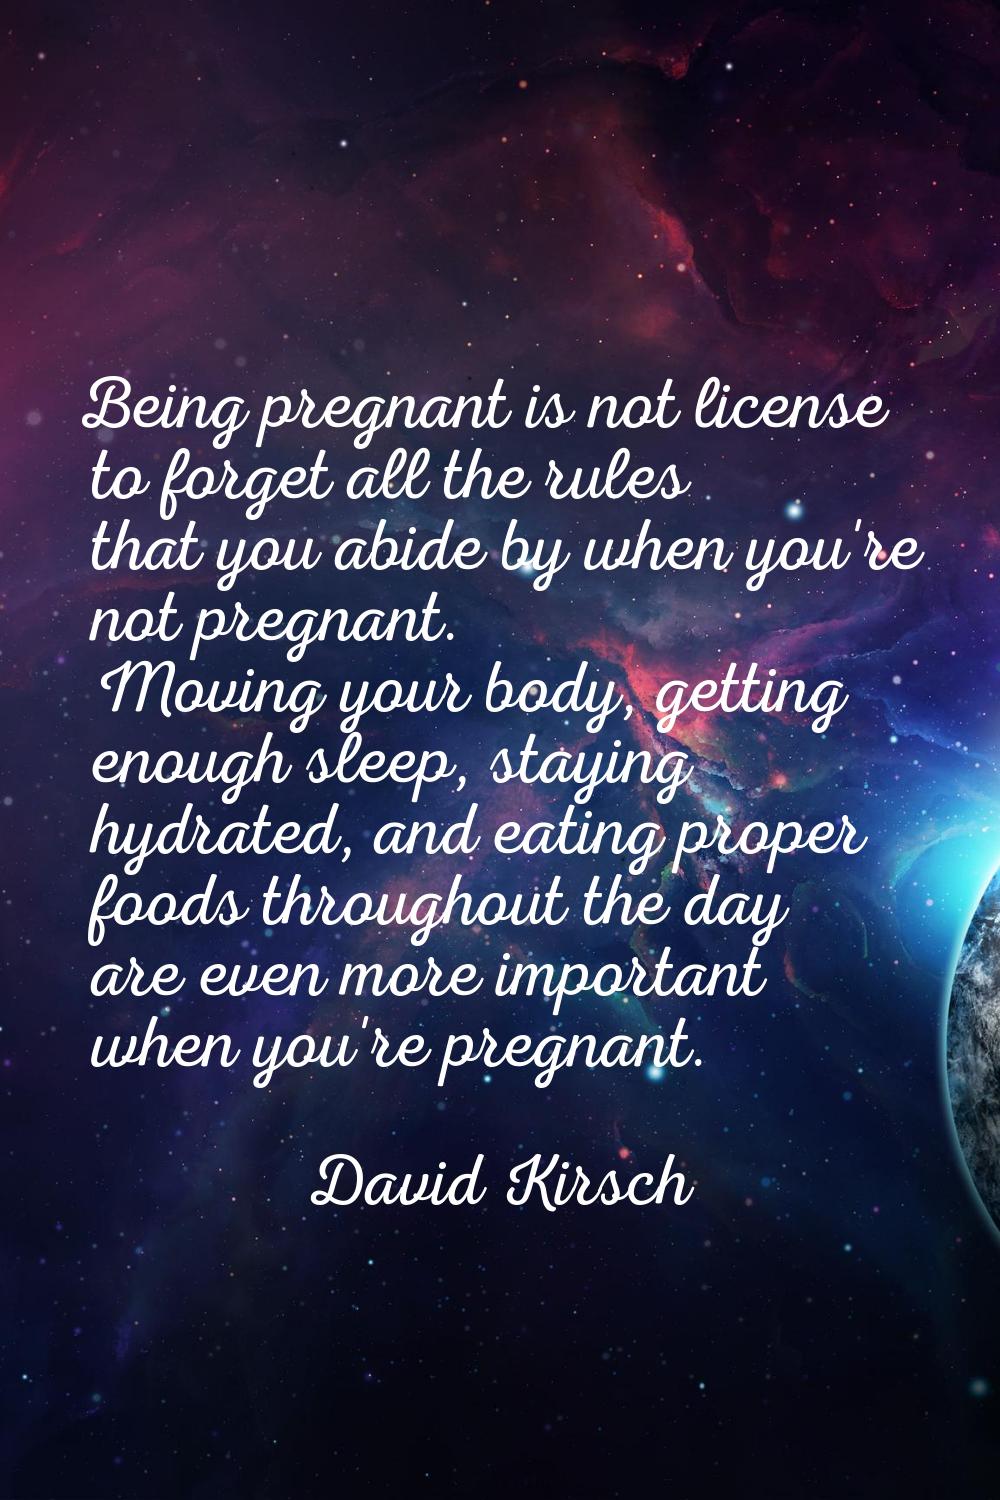 Being pregnant is not license to forget all the rules that you abide by when you're not pregnant. M